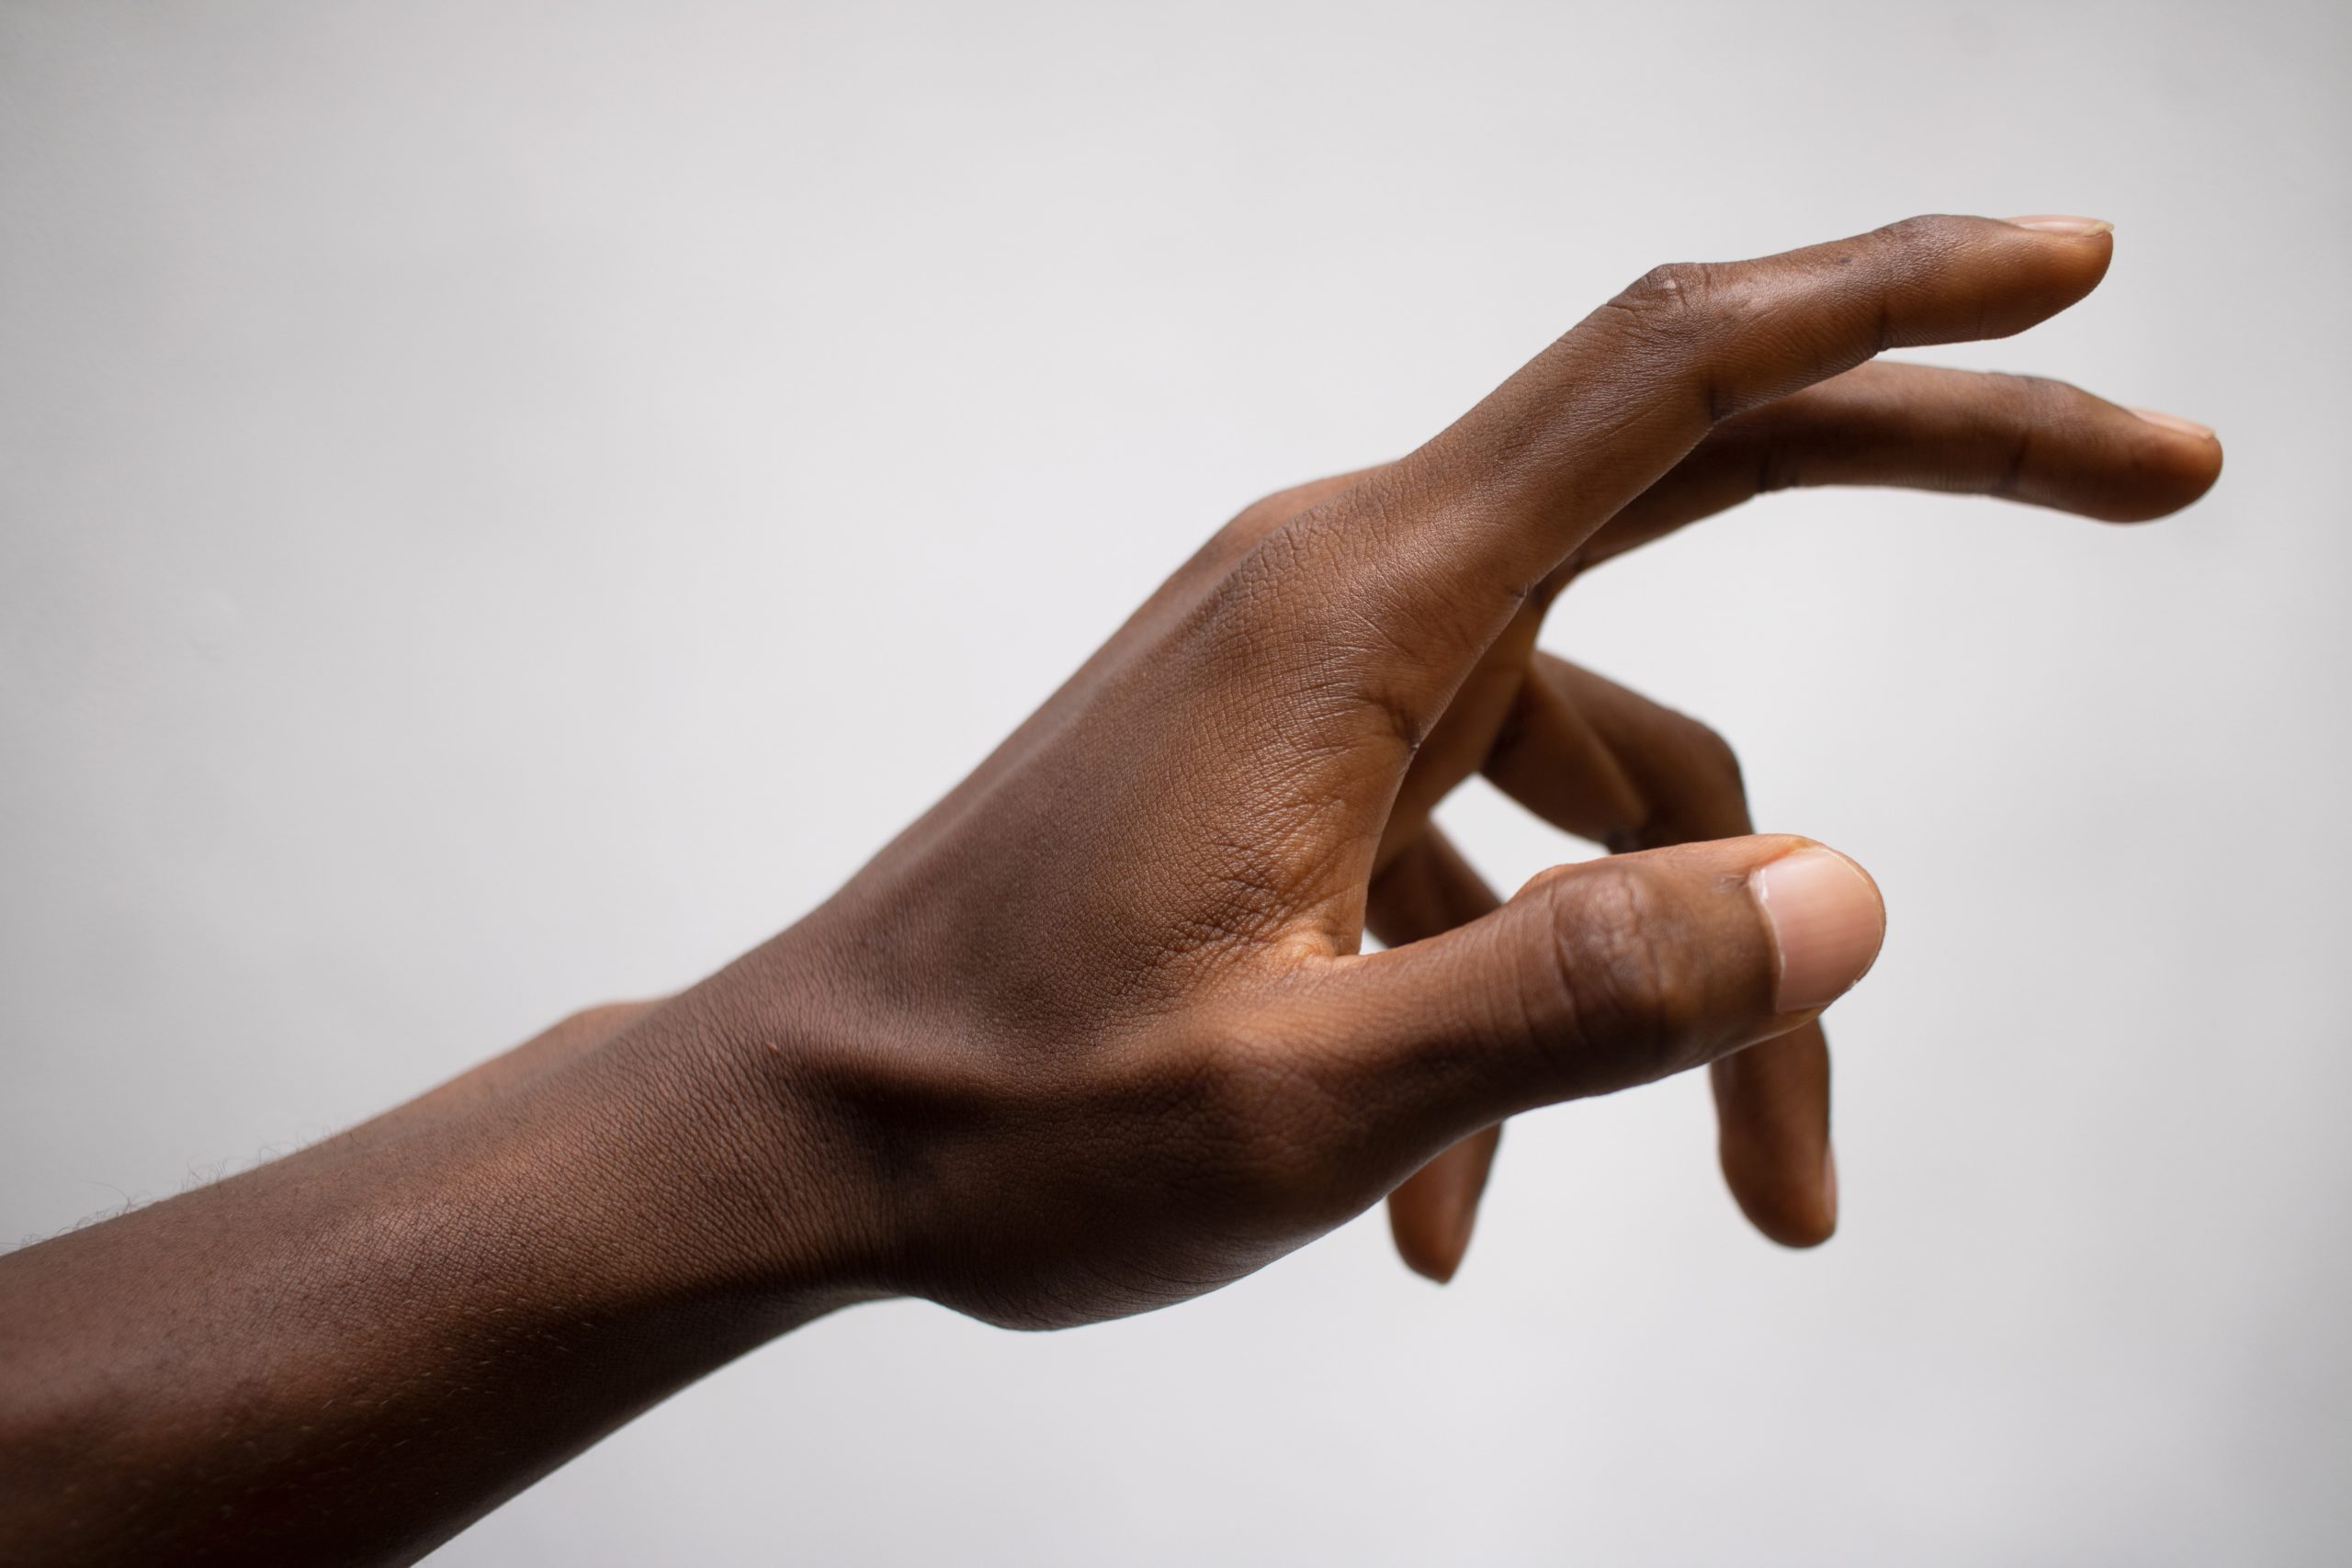 A black hand is being held up in front of a white background.